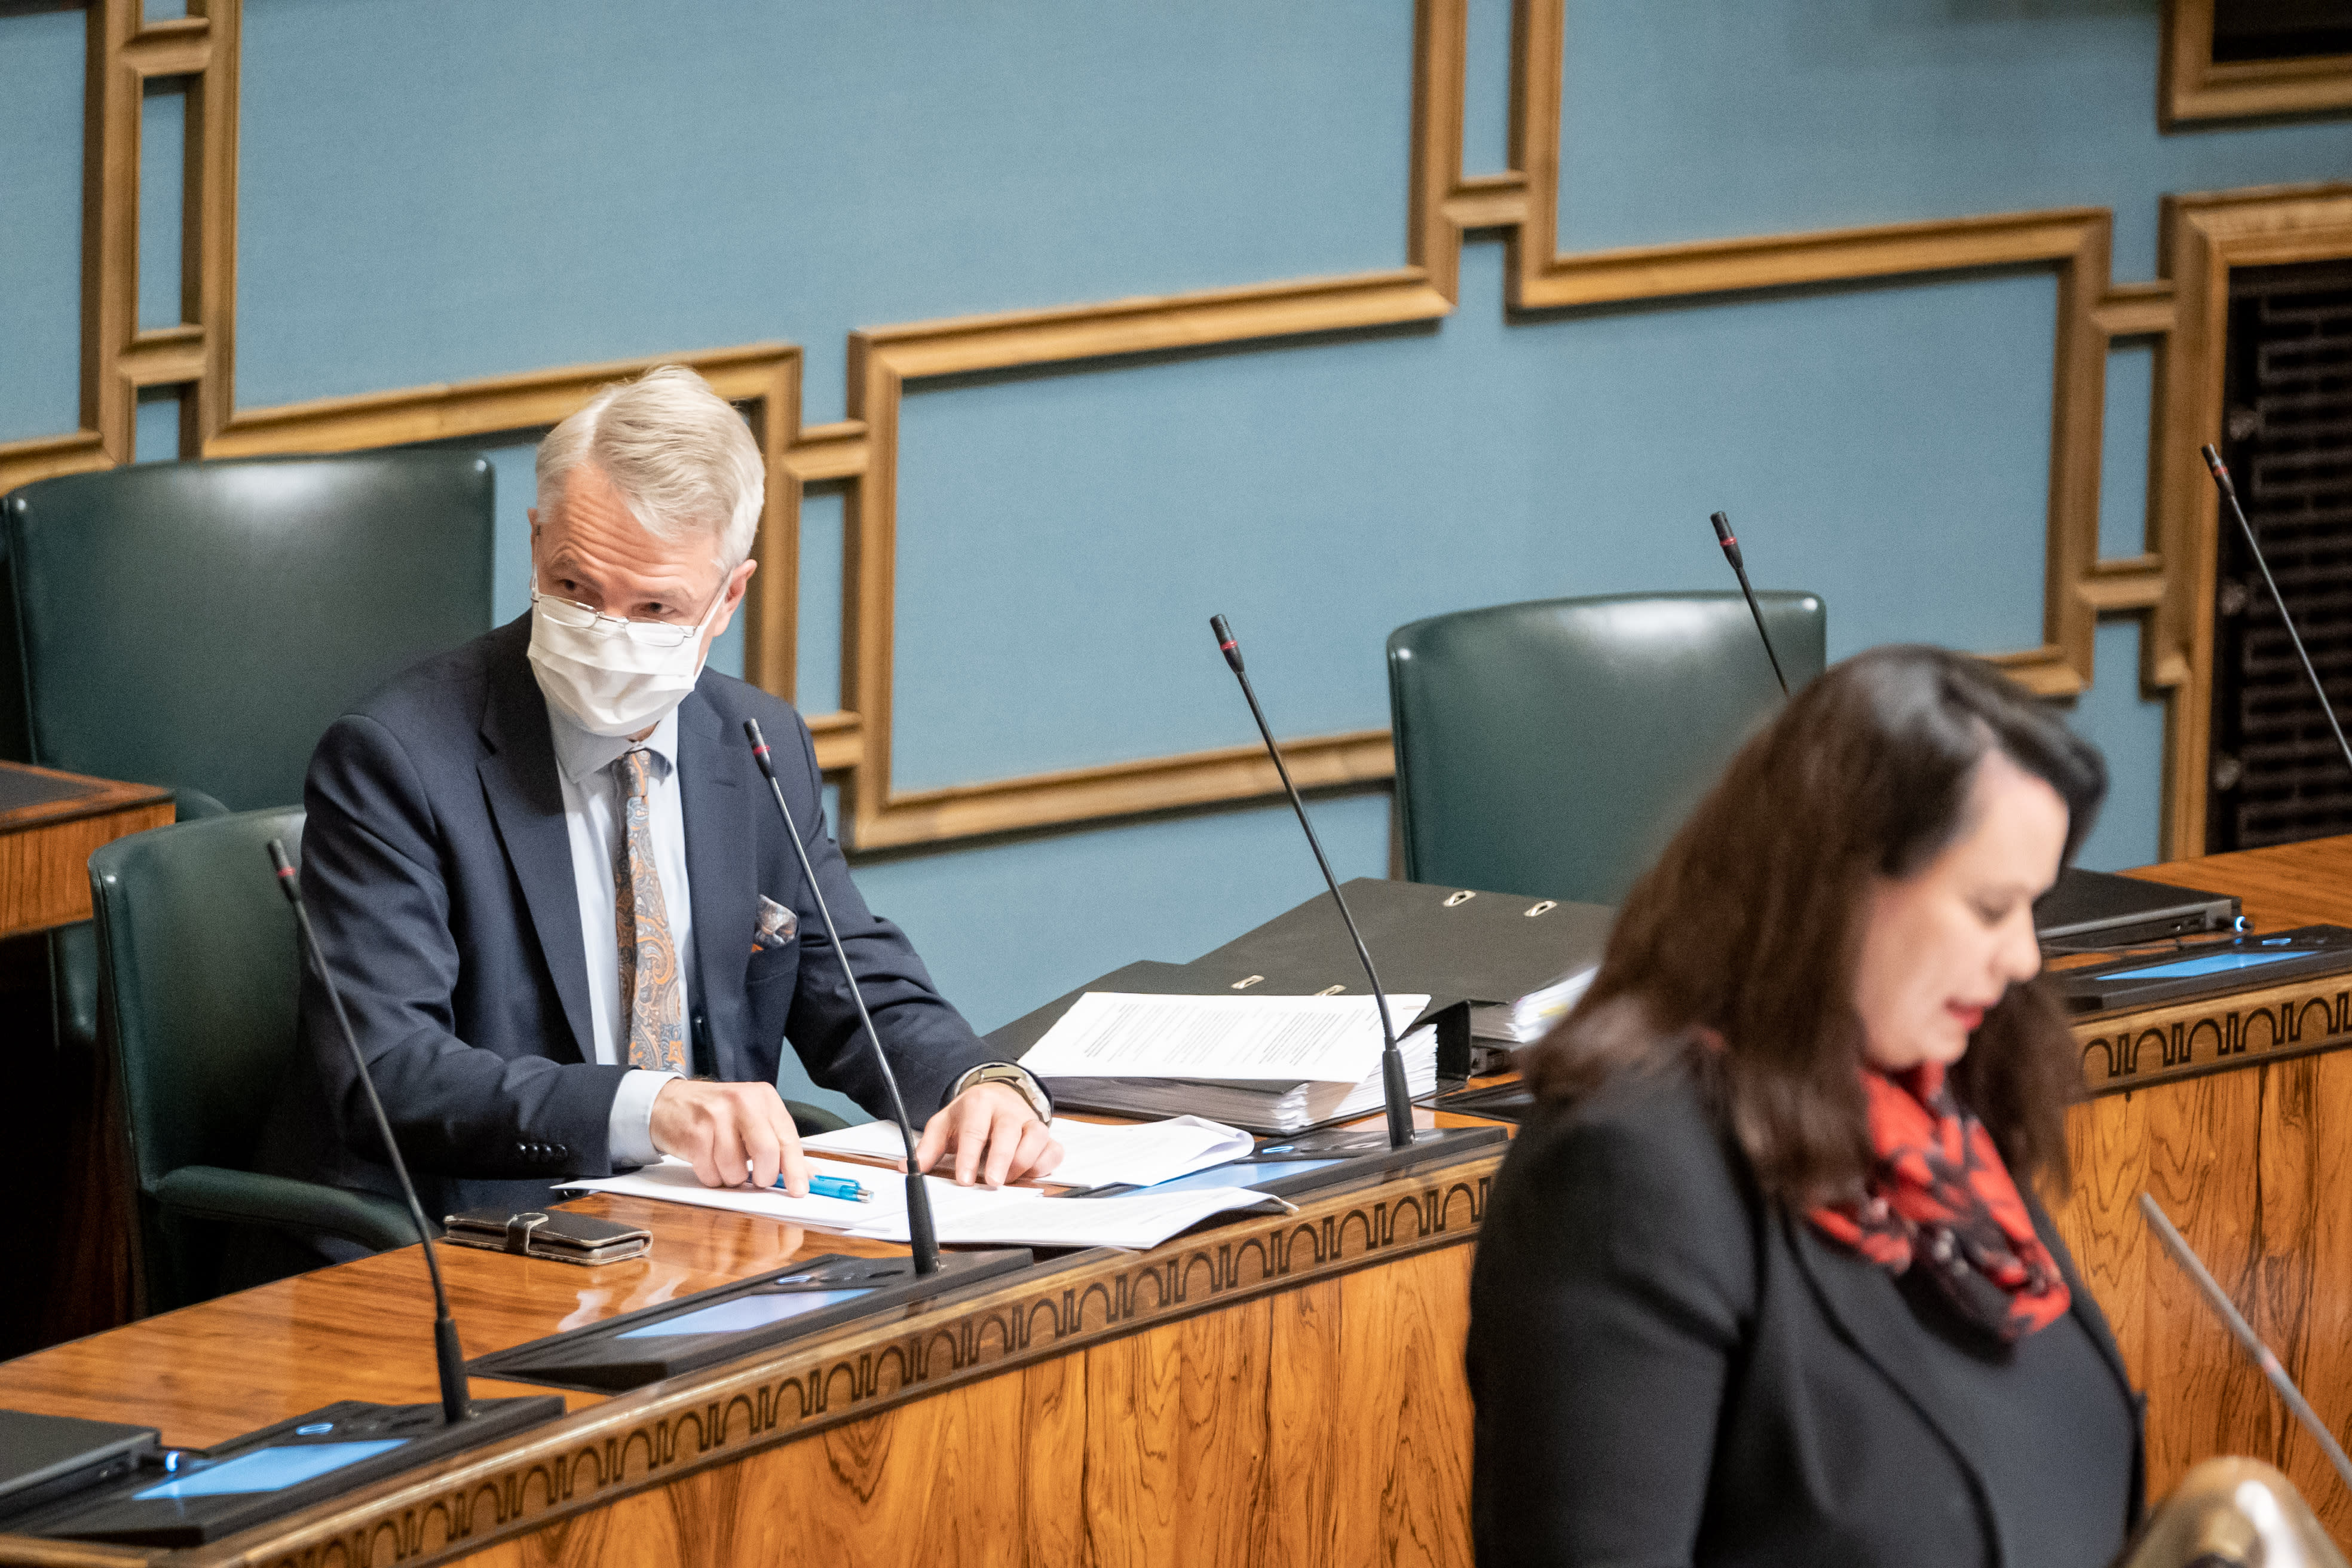 MEPs support Foreign Minister Haavisto in a confidential vote